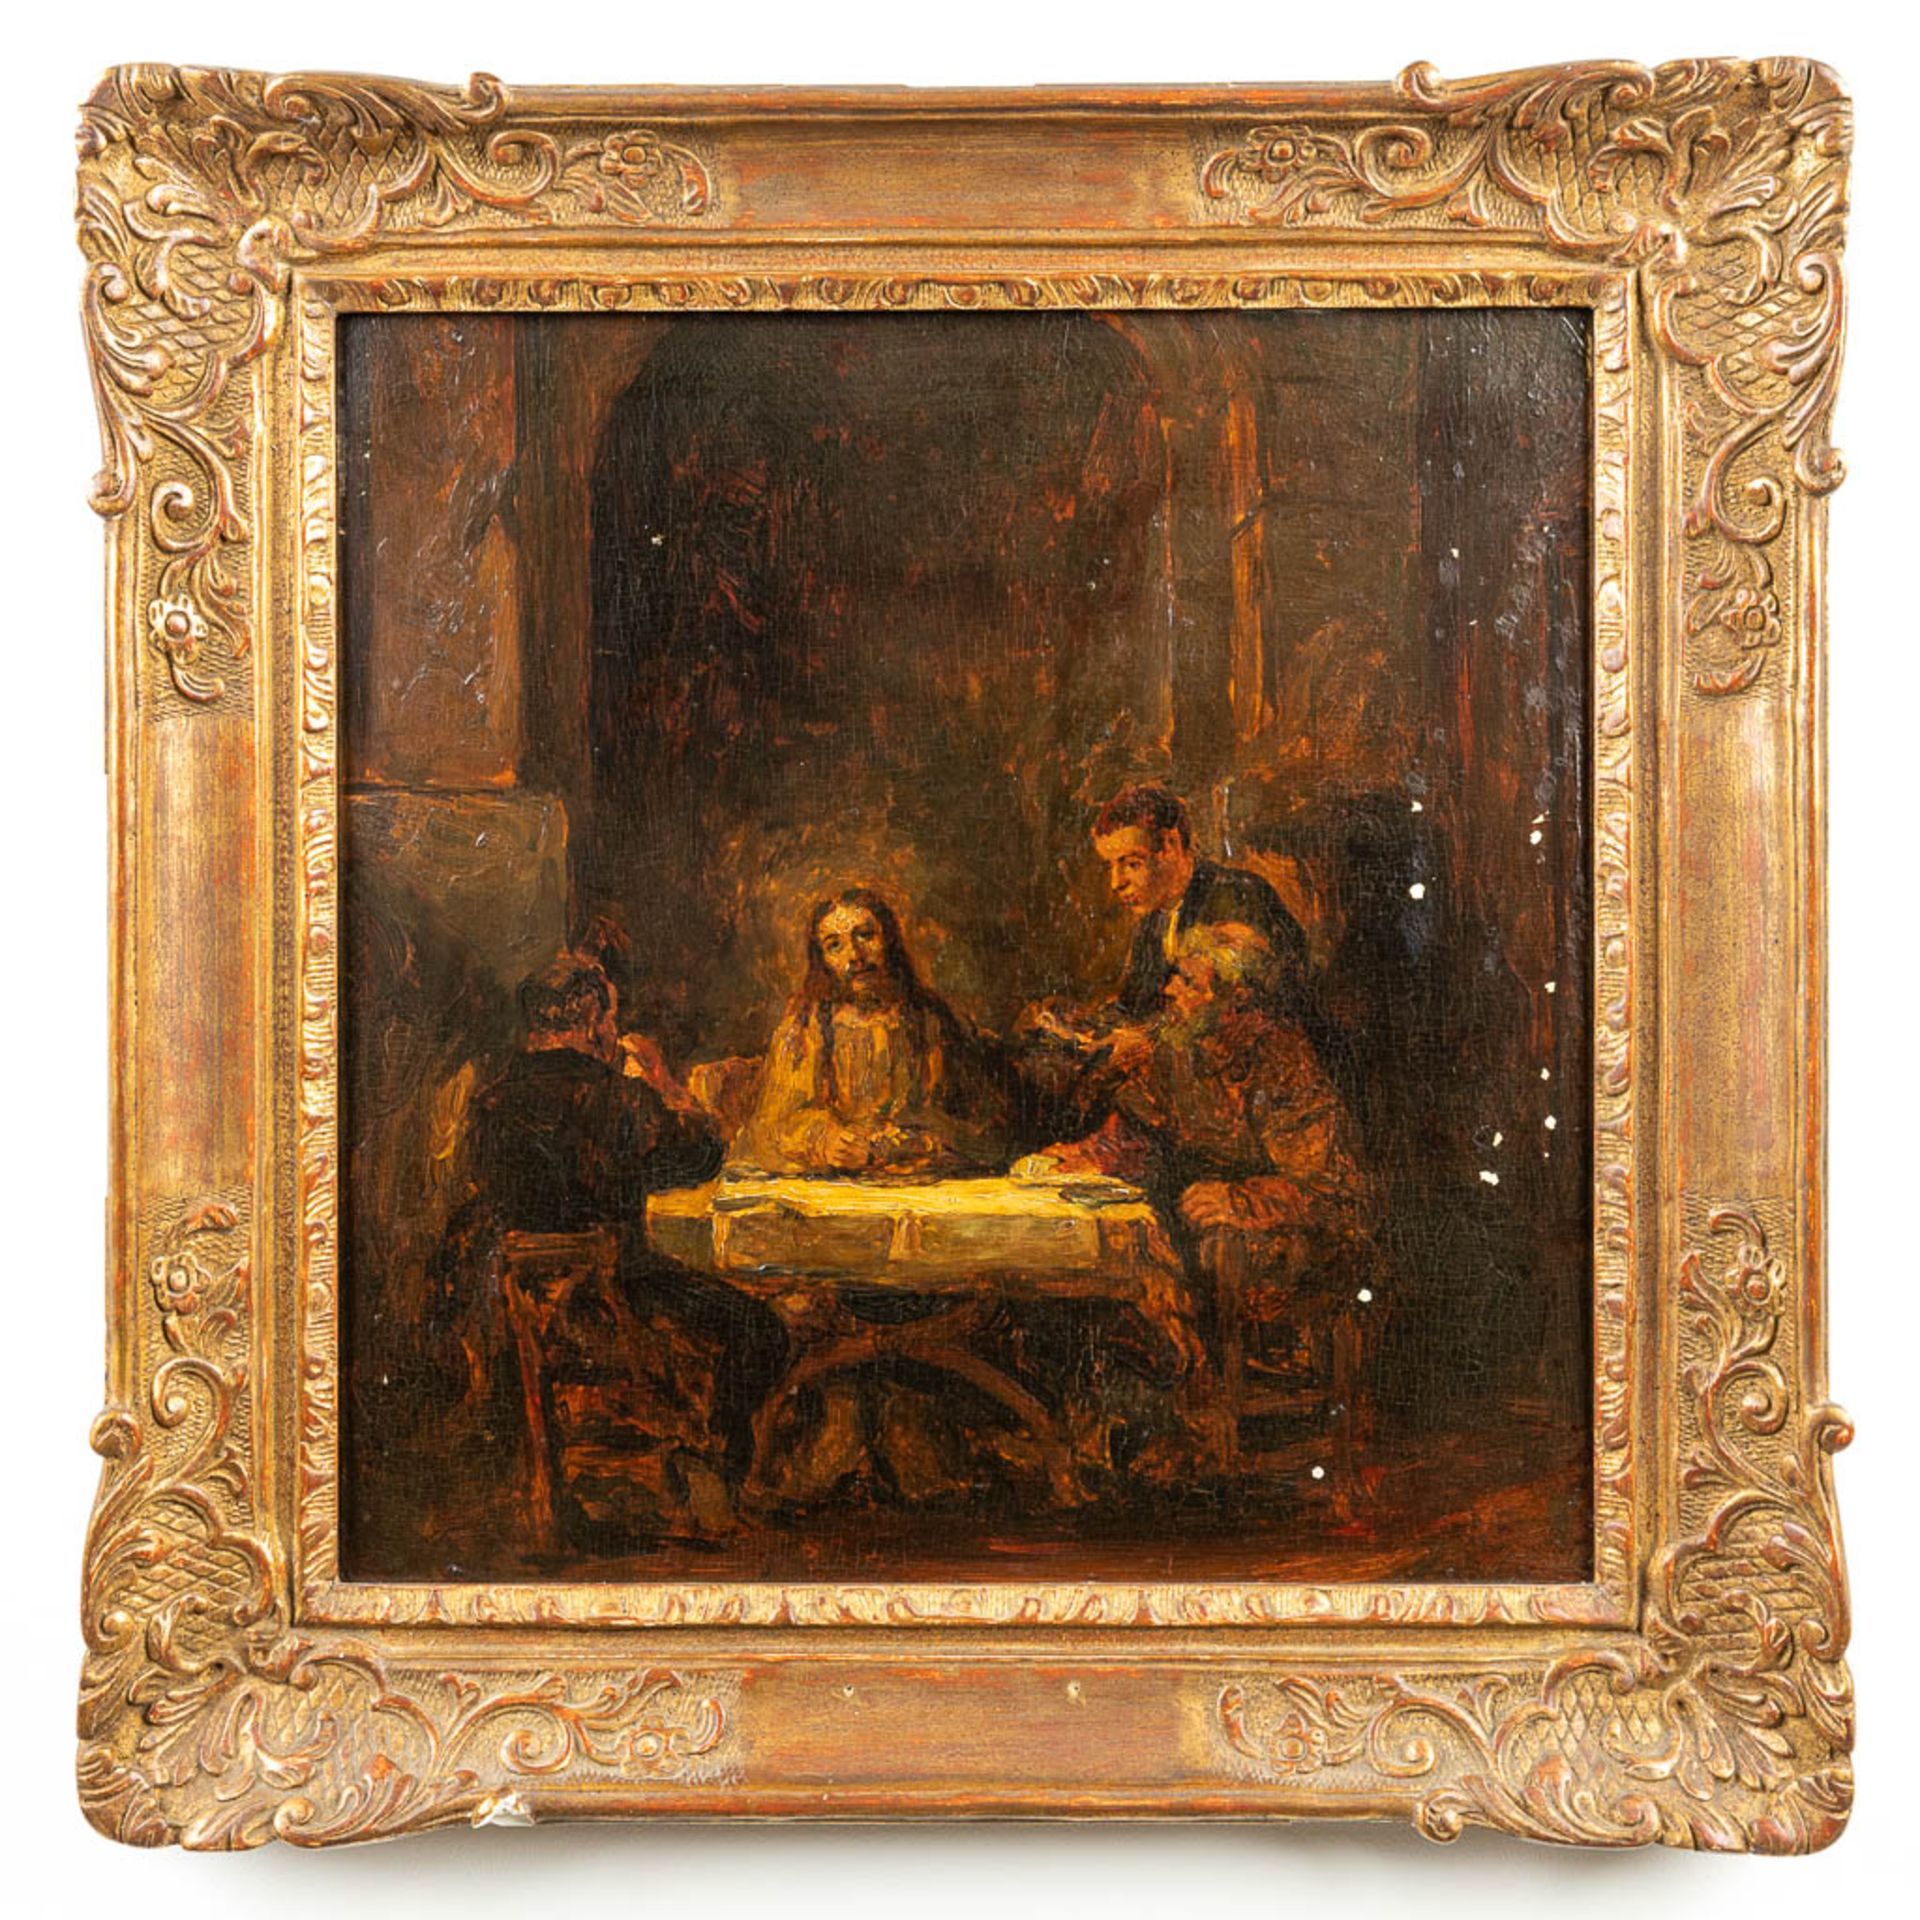 No signature found, 'The Supper at Emmaus' a painting, oil on panel. After Rembrandt Van Rijn - Image 6 of 6